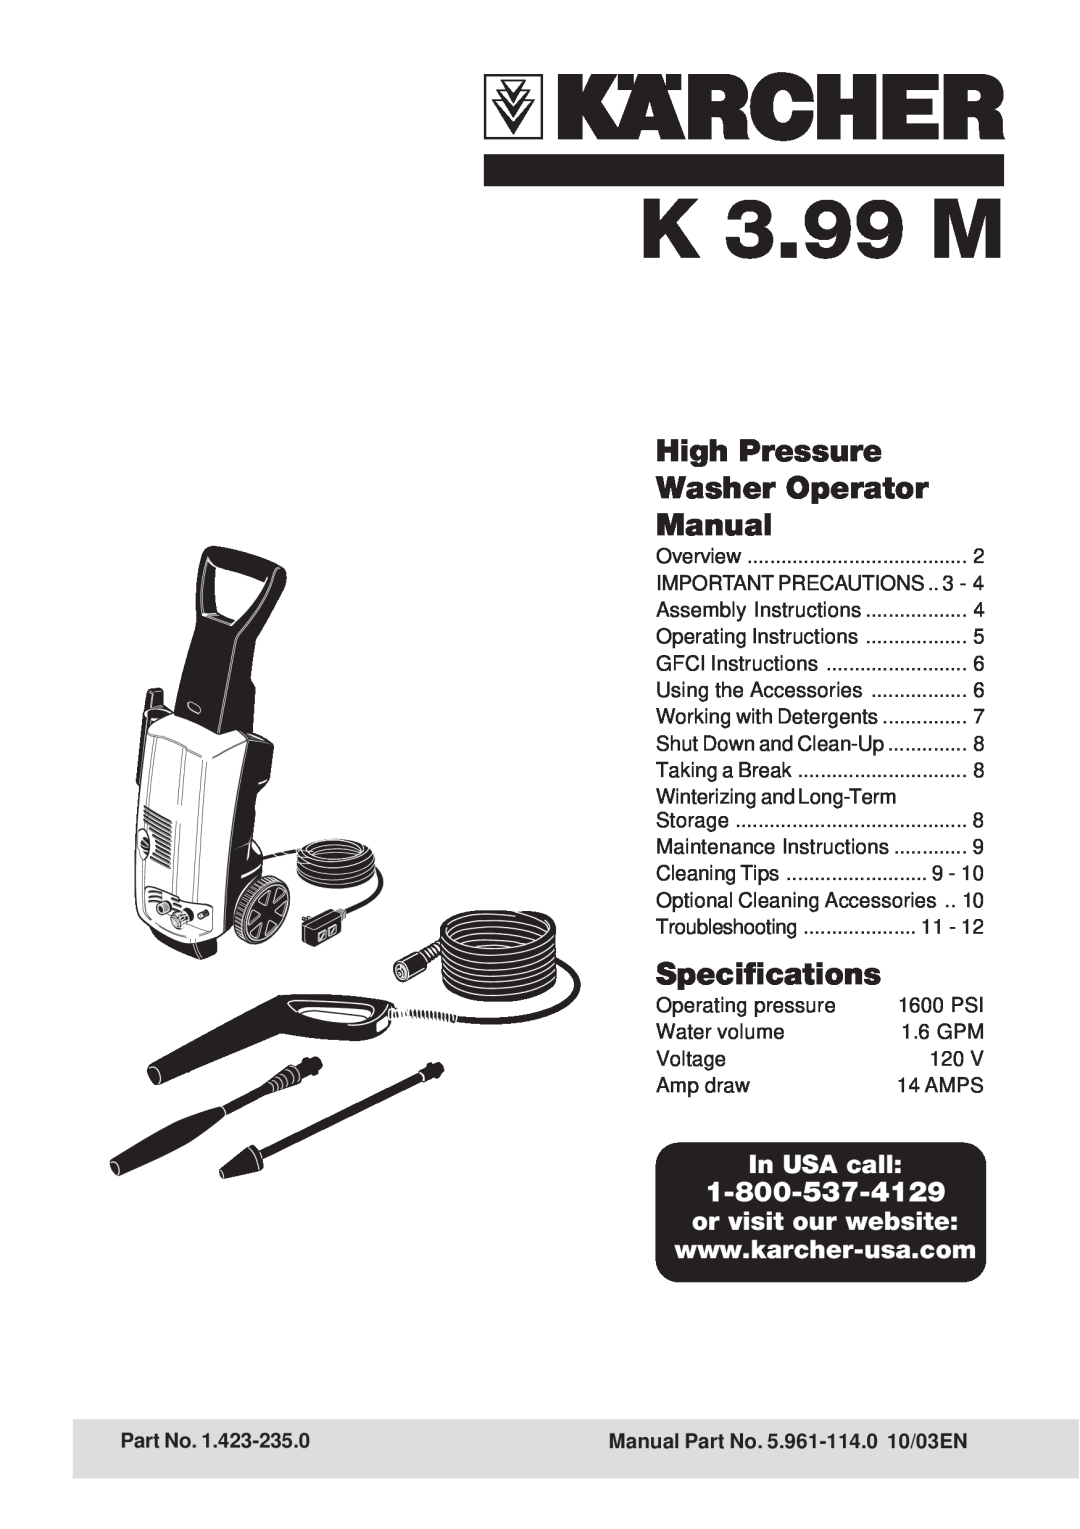 Karcher K 3.99 M specifications High Pressure, Washer Operator, Manual, Specifications, In USA call, or visit our website 